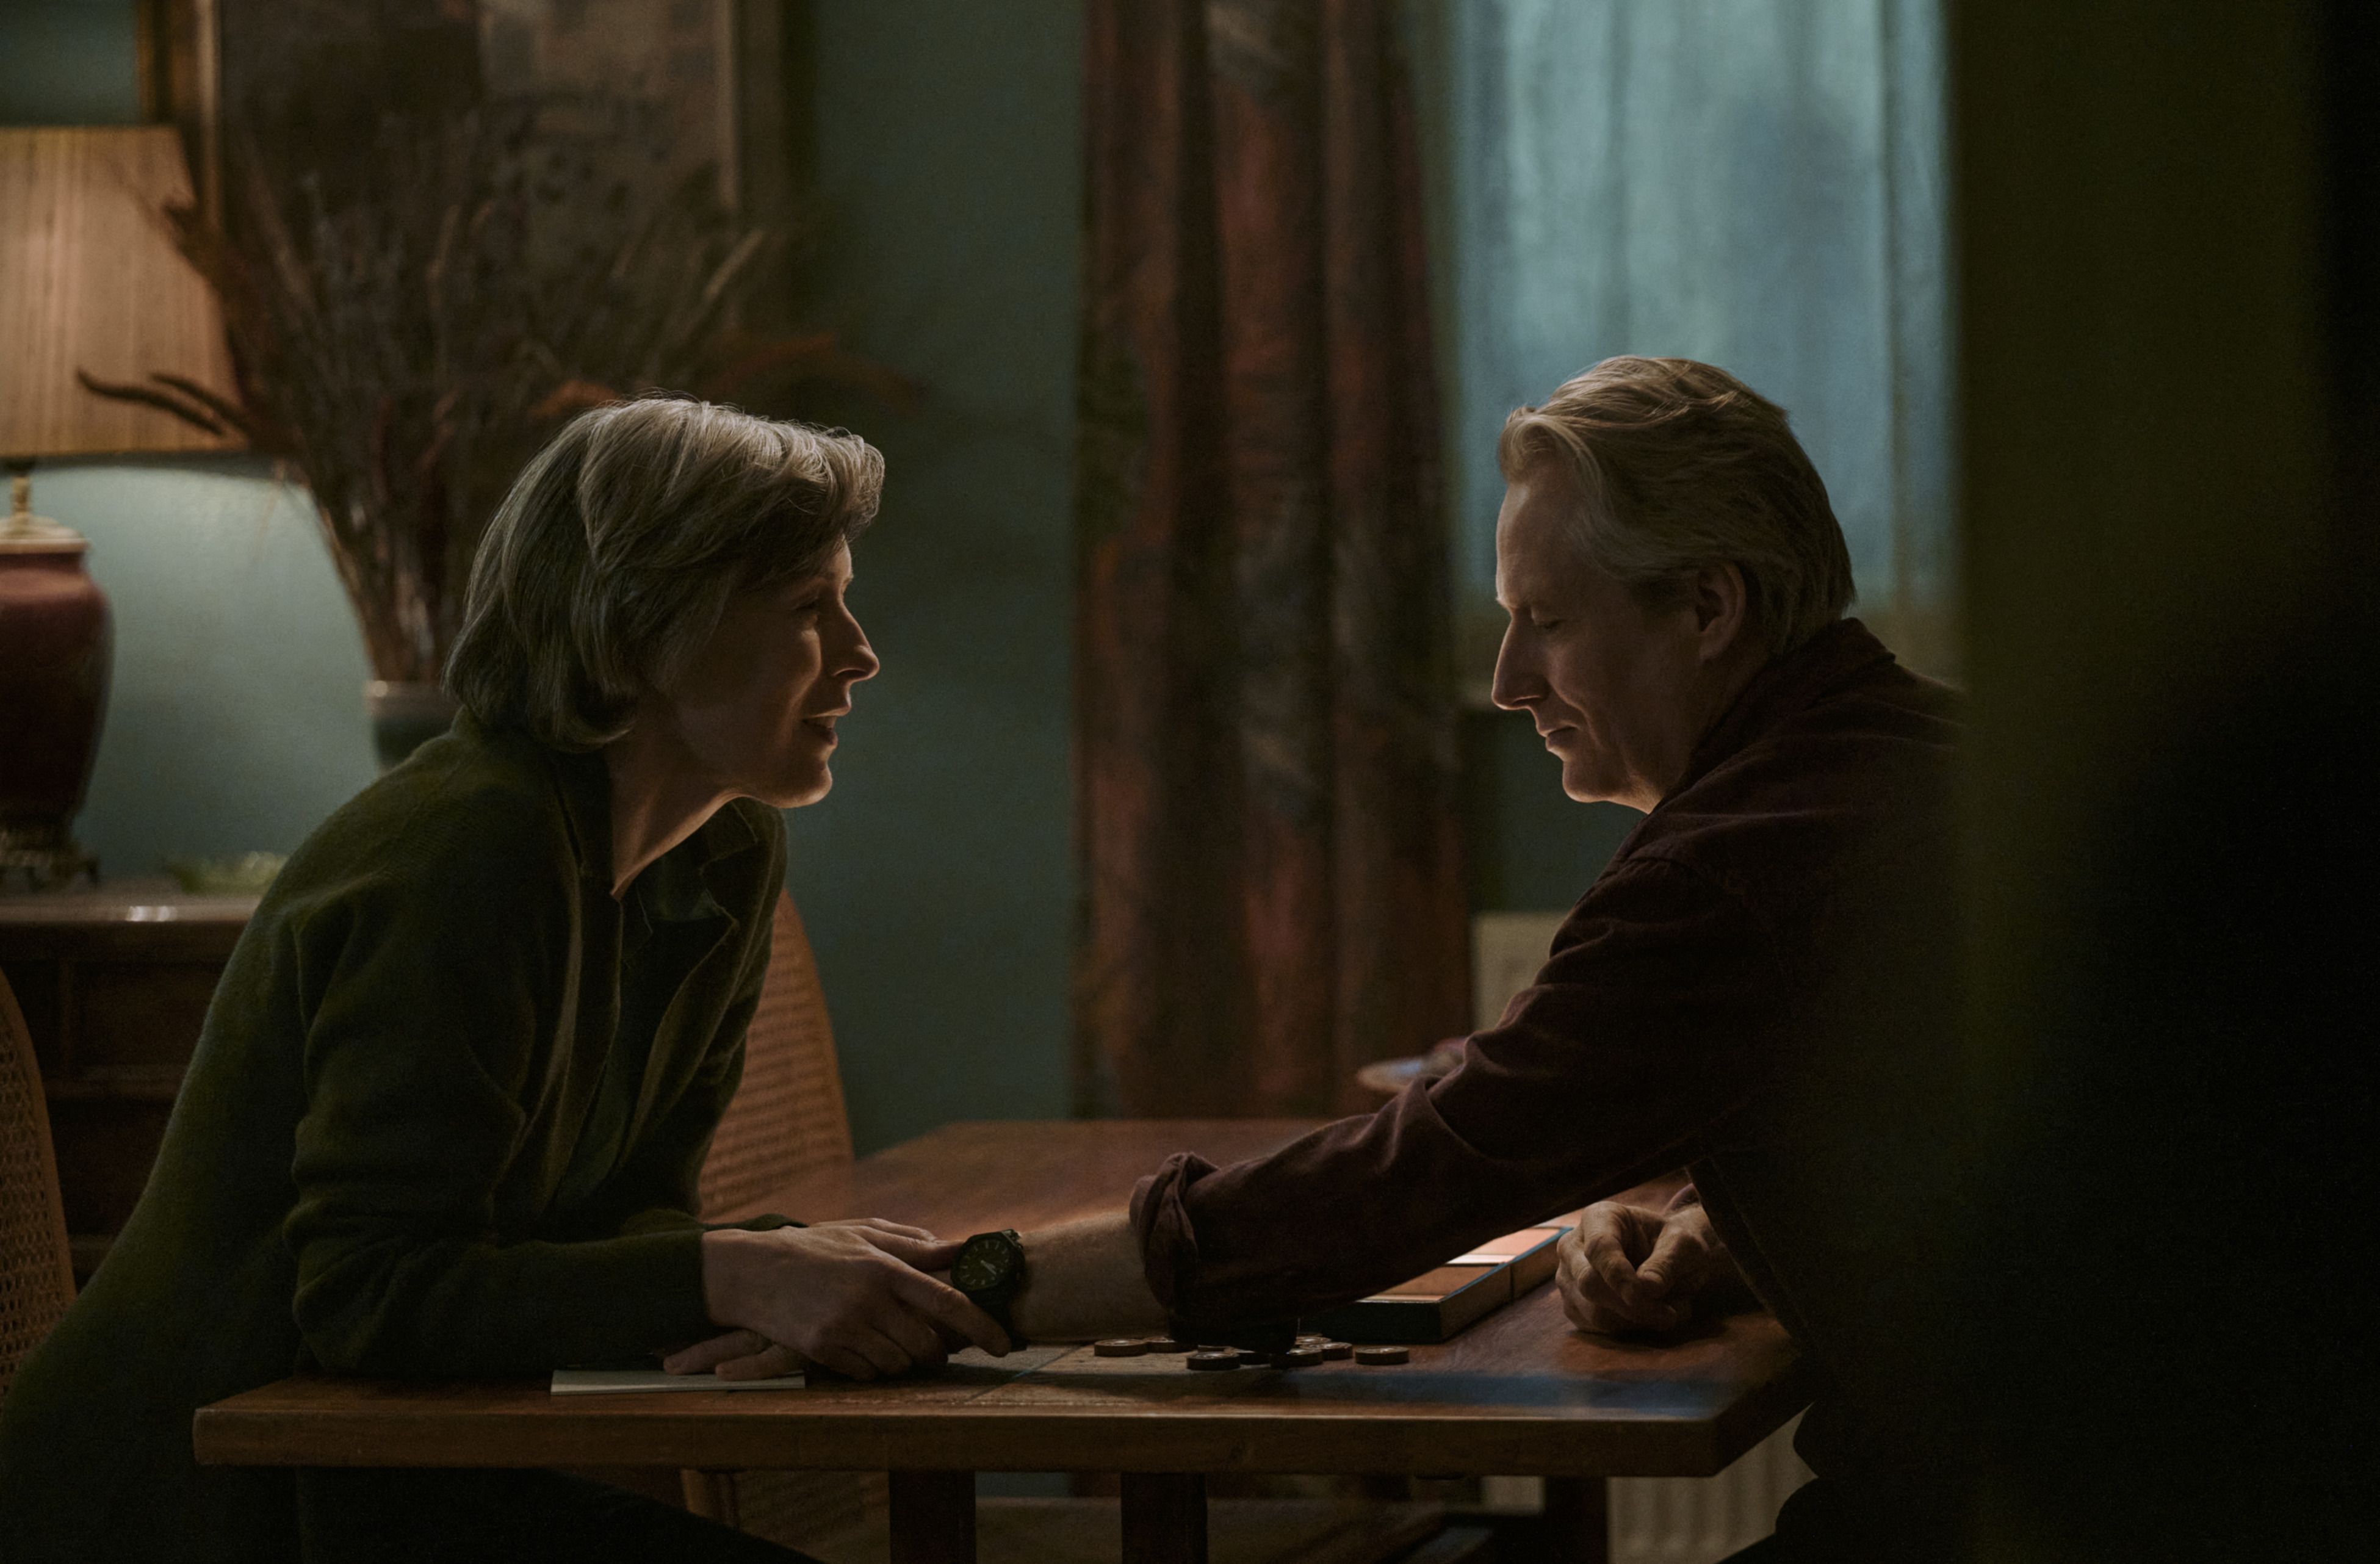 Gina McKee and Linus Roache in a still from My Policeman.